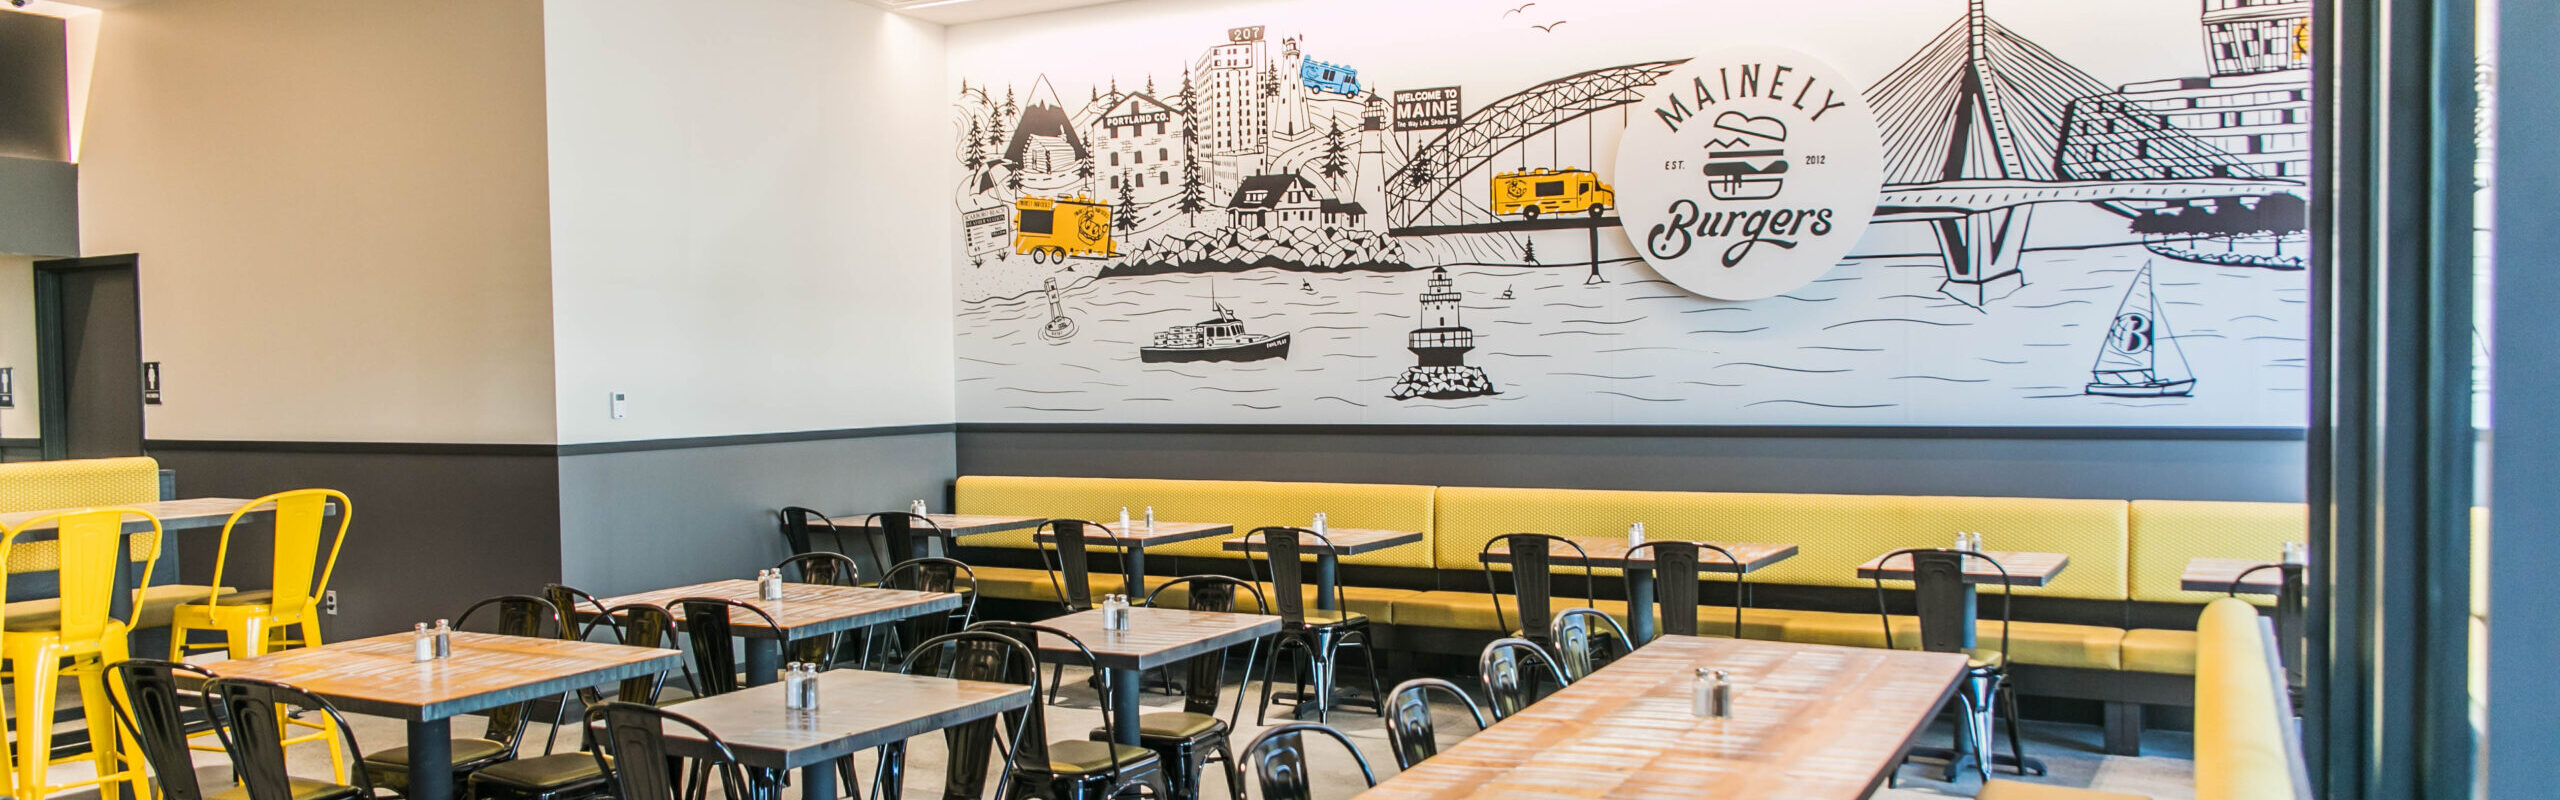 Fast Casual Burger restaurant and dining area with wall art, seating, chairs, and tables